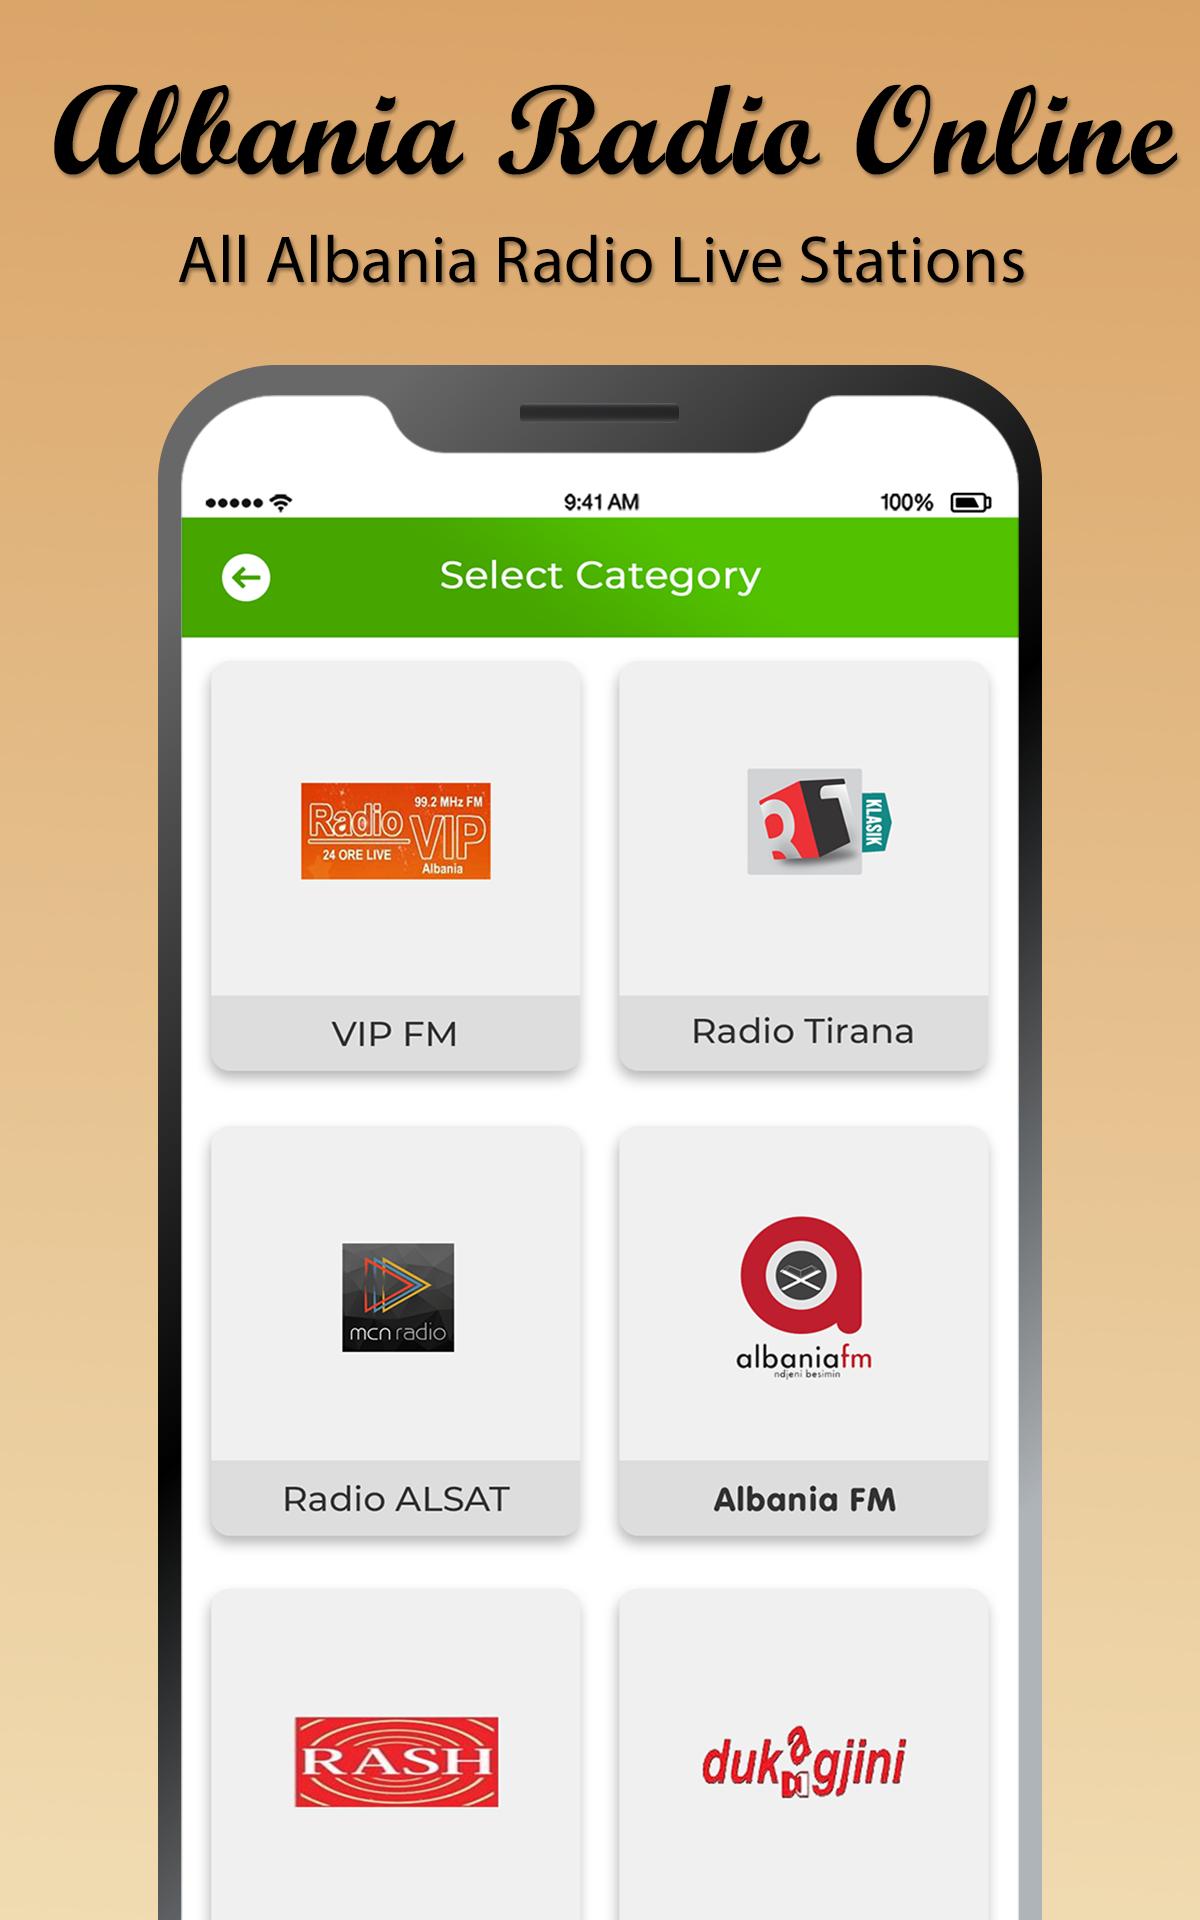 Albania Radio Online - All Albania Live Stations for Android - APK Download